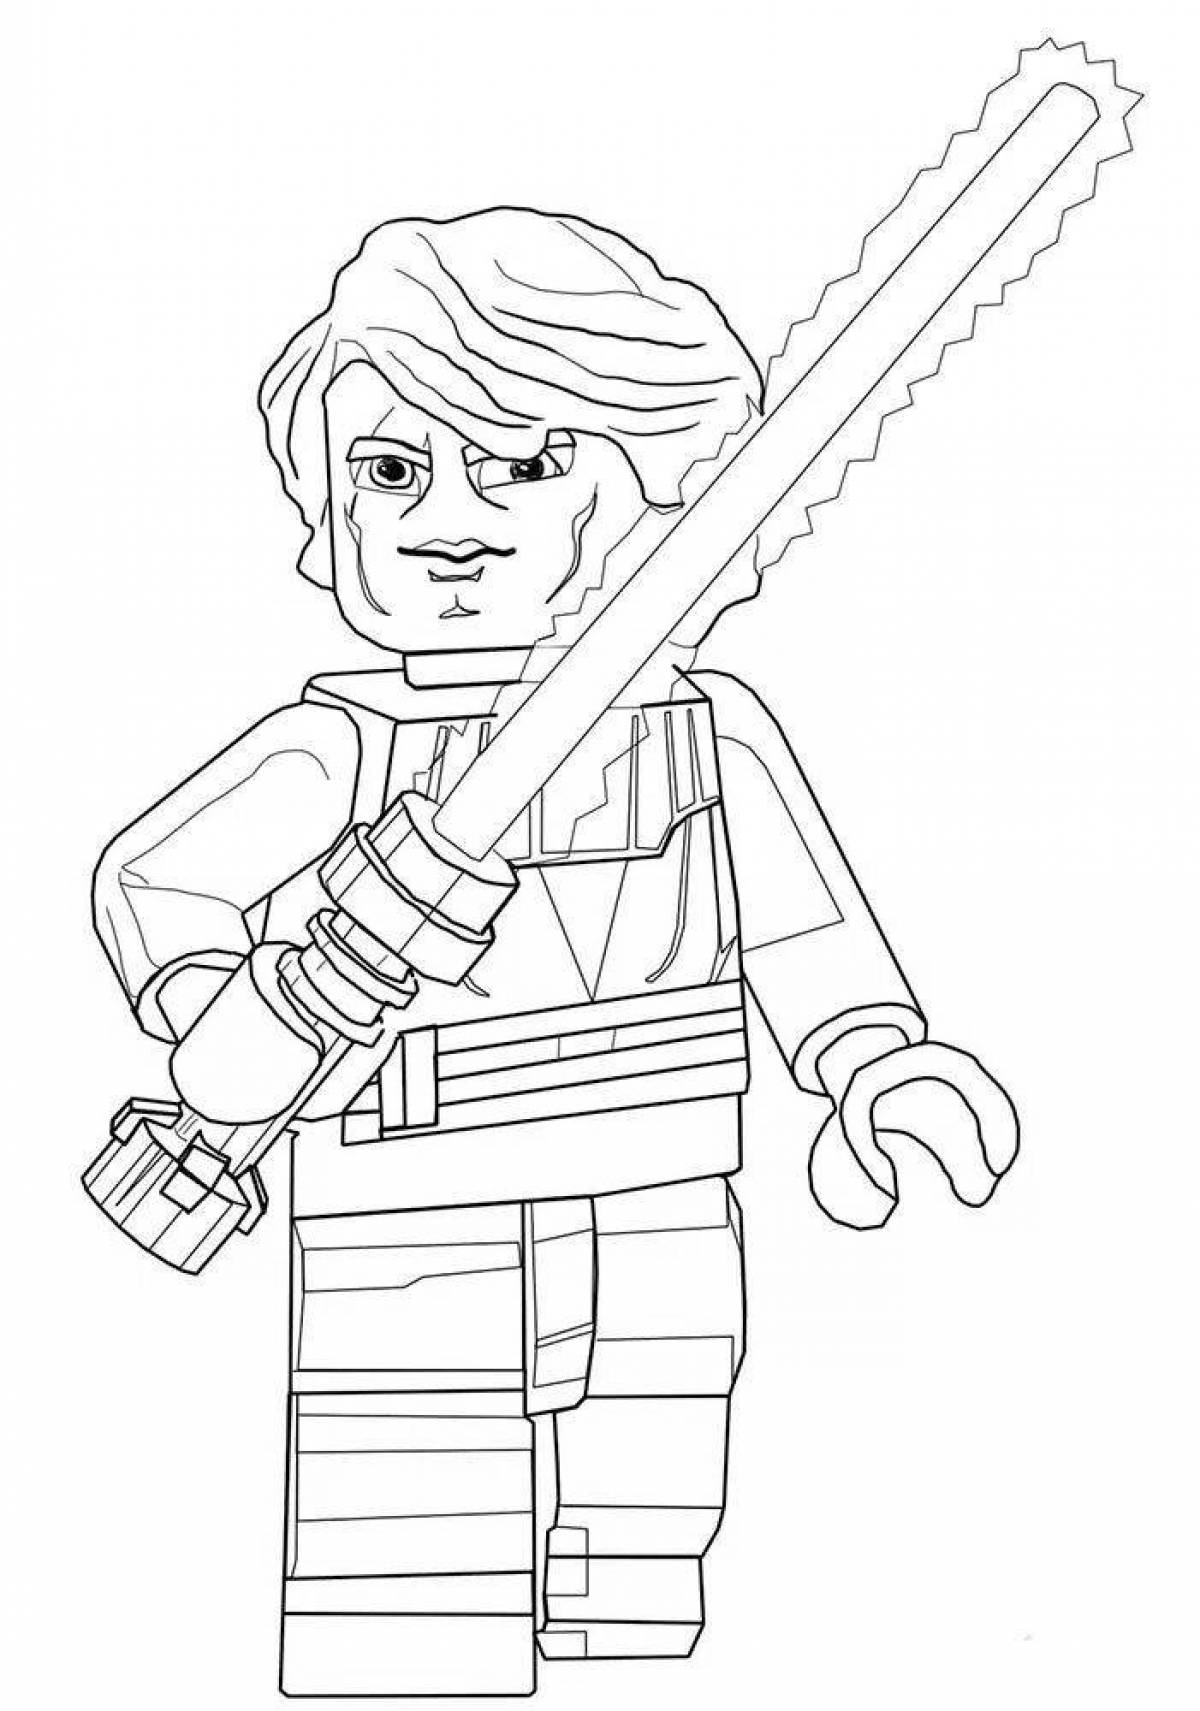 Playful lego star wars coloring page